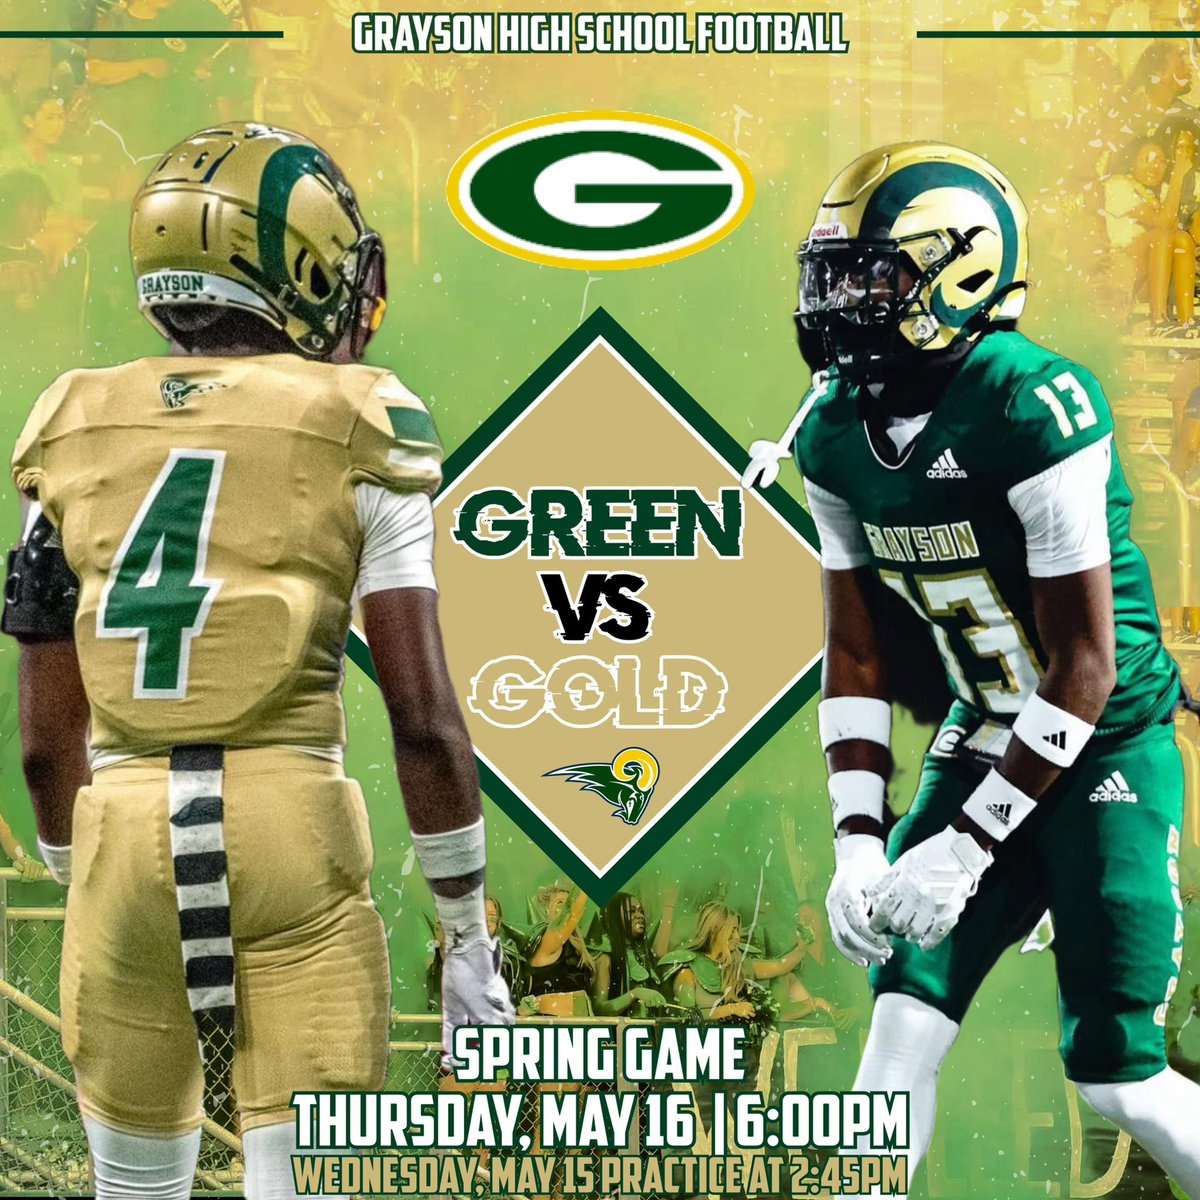 🚨SPRING GAME May 16 @ 6 p.m.🚨 Due to our baseball team playing for the state championship on Friday we have moved our spring game to Thursday May 16 at 6 p.m. 🔰#4theG🔰